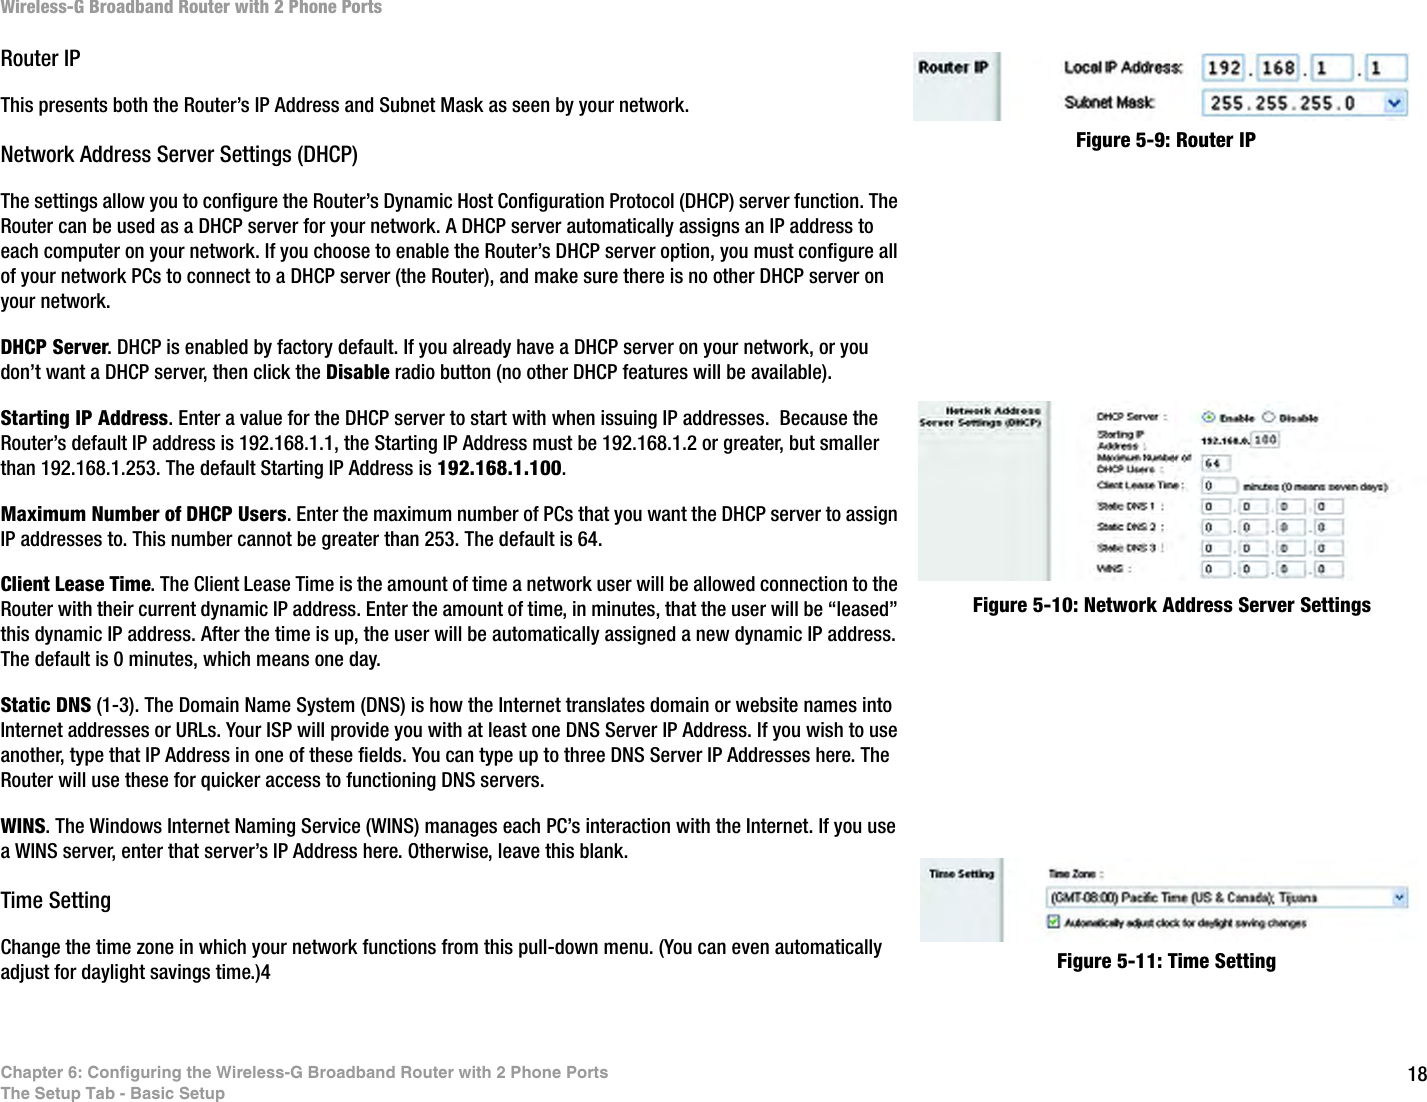 18Chapter 6: Configuring the Wireless-G Broadband Router with 2 Phone PortsThe Setup Tab - Basic SetupWireless-G Broadband Router with 2 Phone PortsRouter IPThis presents both the Router’s IP Address and Subnet Mask as seen by your network.Network Address Server Settings (DHCP)The settings allow you to configure the Router’s Dynamic Host Configuration Protocol (DHCP) server function. The Router can be used as a DHCP server for your network. A DHCP server automatically assigns an IP address to each computer on your network. If you choose to enable the Router’s DHCP server option, you must configure all of your network PCs to connect to a DHCP server (the Router), and make sure there is no other DHCP server on your network. DHCP Server. DHCP is enabled by factory default. If you already have a DHCP server on your network, or you don’t want a DHCP server, then click the Disable radio button (no other DHCP features will be available).Starting IP Address. Enter a value for the DHCP server to start with when issuing IP addresses.  Because the Router’s default IP address is 192.168.1.1, the Starting IP Address must be 192.168.1.2 or greater, but smaller than 192.168.1.253. The default Starting IP Address is 192.168.1.100.Maximum Number of DHCP Users. Enter the maximum number of PCs that you want the DHCP server to assign IP addresses to. This number cannot be greater than 253. The default is 64.Client Lease Time. The Client Lease Time is the amount of time a network user will be allowed connection to the Router with their current dynamic IP address. Enter the amount of time, in minutes, that the user will be “leased” this dynamic IP address. After the time is up, the user will be automatically assigned a new dynamic IP address. The default is 0 minutes, which means one day.Static DNS (1-3). The Domain Name System (DNS) is how the Internet translates domain or website names into Internet addresses or URLs. Your ISP will provide you with at least one DNS Server IP Address. If you wish to use another, type that IP Address in one of these fields. You can type up to three DNS Server IP Addresses here. The Router will use these for quicker access to functioning DNS servers.WINS. The Windows Internet Naming Service (WINS) manages each PC’s interaction with the Internet. If you use a WINS server, enter that server’s IP Address here. Otherwise, leave this blank.Time SettingChange the time zone in which your network functions from this pull-down menu. (You can even automatically adjust for daylight savings time.)4Figure 5-9: Router IPFigure 5-11: Time SettingFigure 5-10: Network Address Server Settings